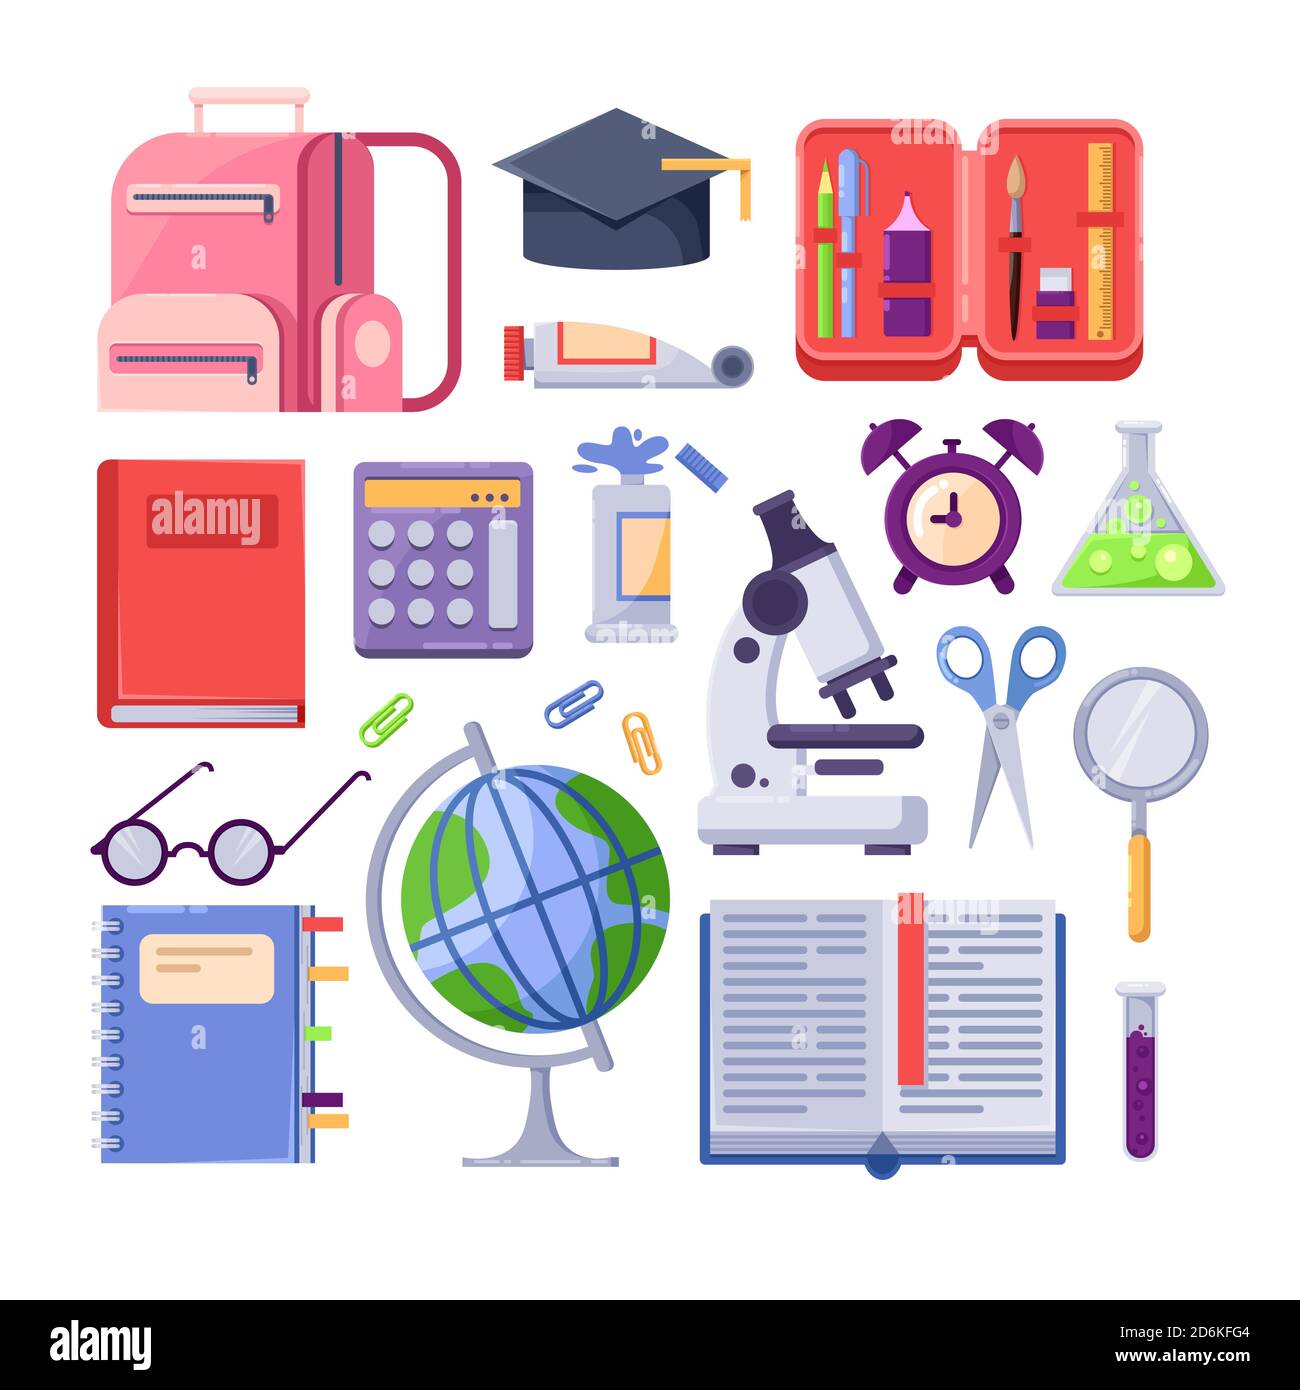 https://c8.alamy.com/comp/2D6KFG4/back-to-school-colorful-icons-and-vector-design-elements-education-stationery-supplies-and-tools-isolated-on-white-background-2D6KFG4.jpg